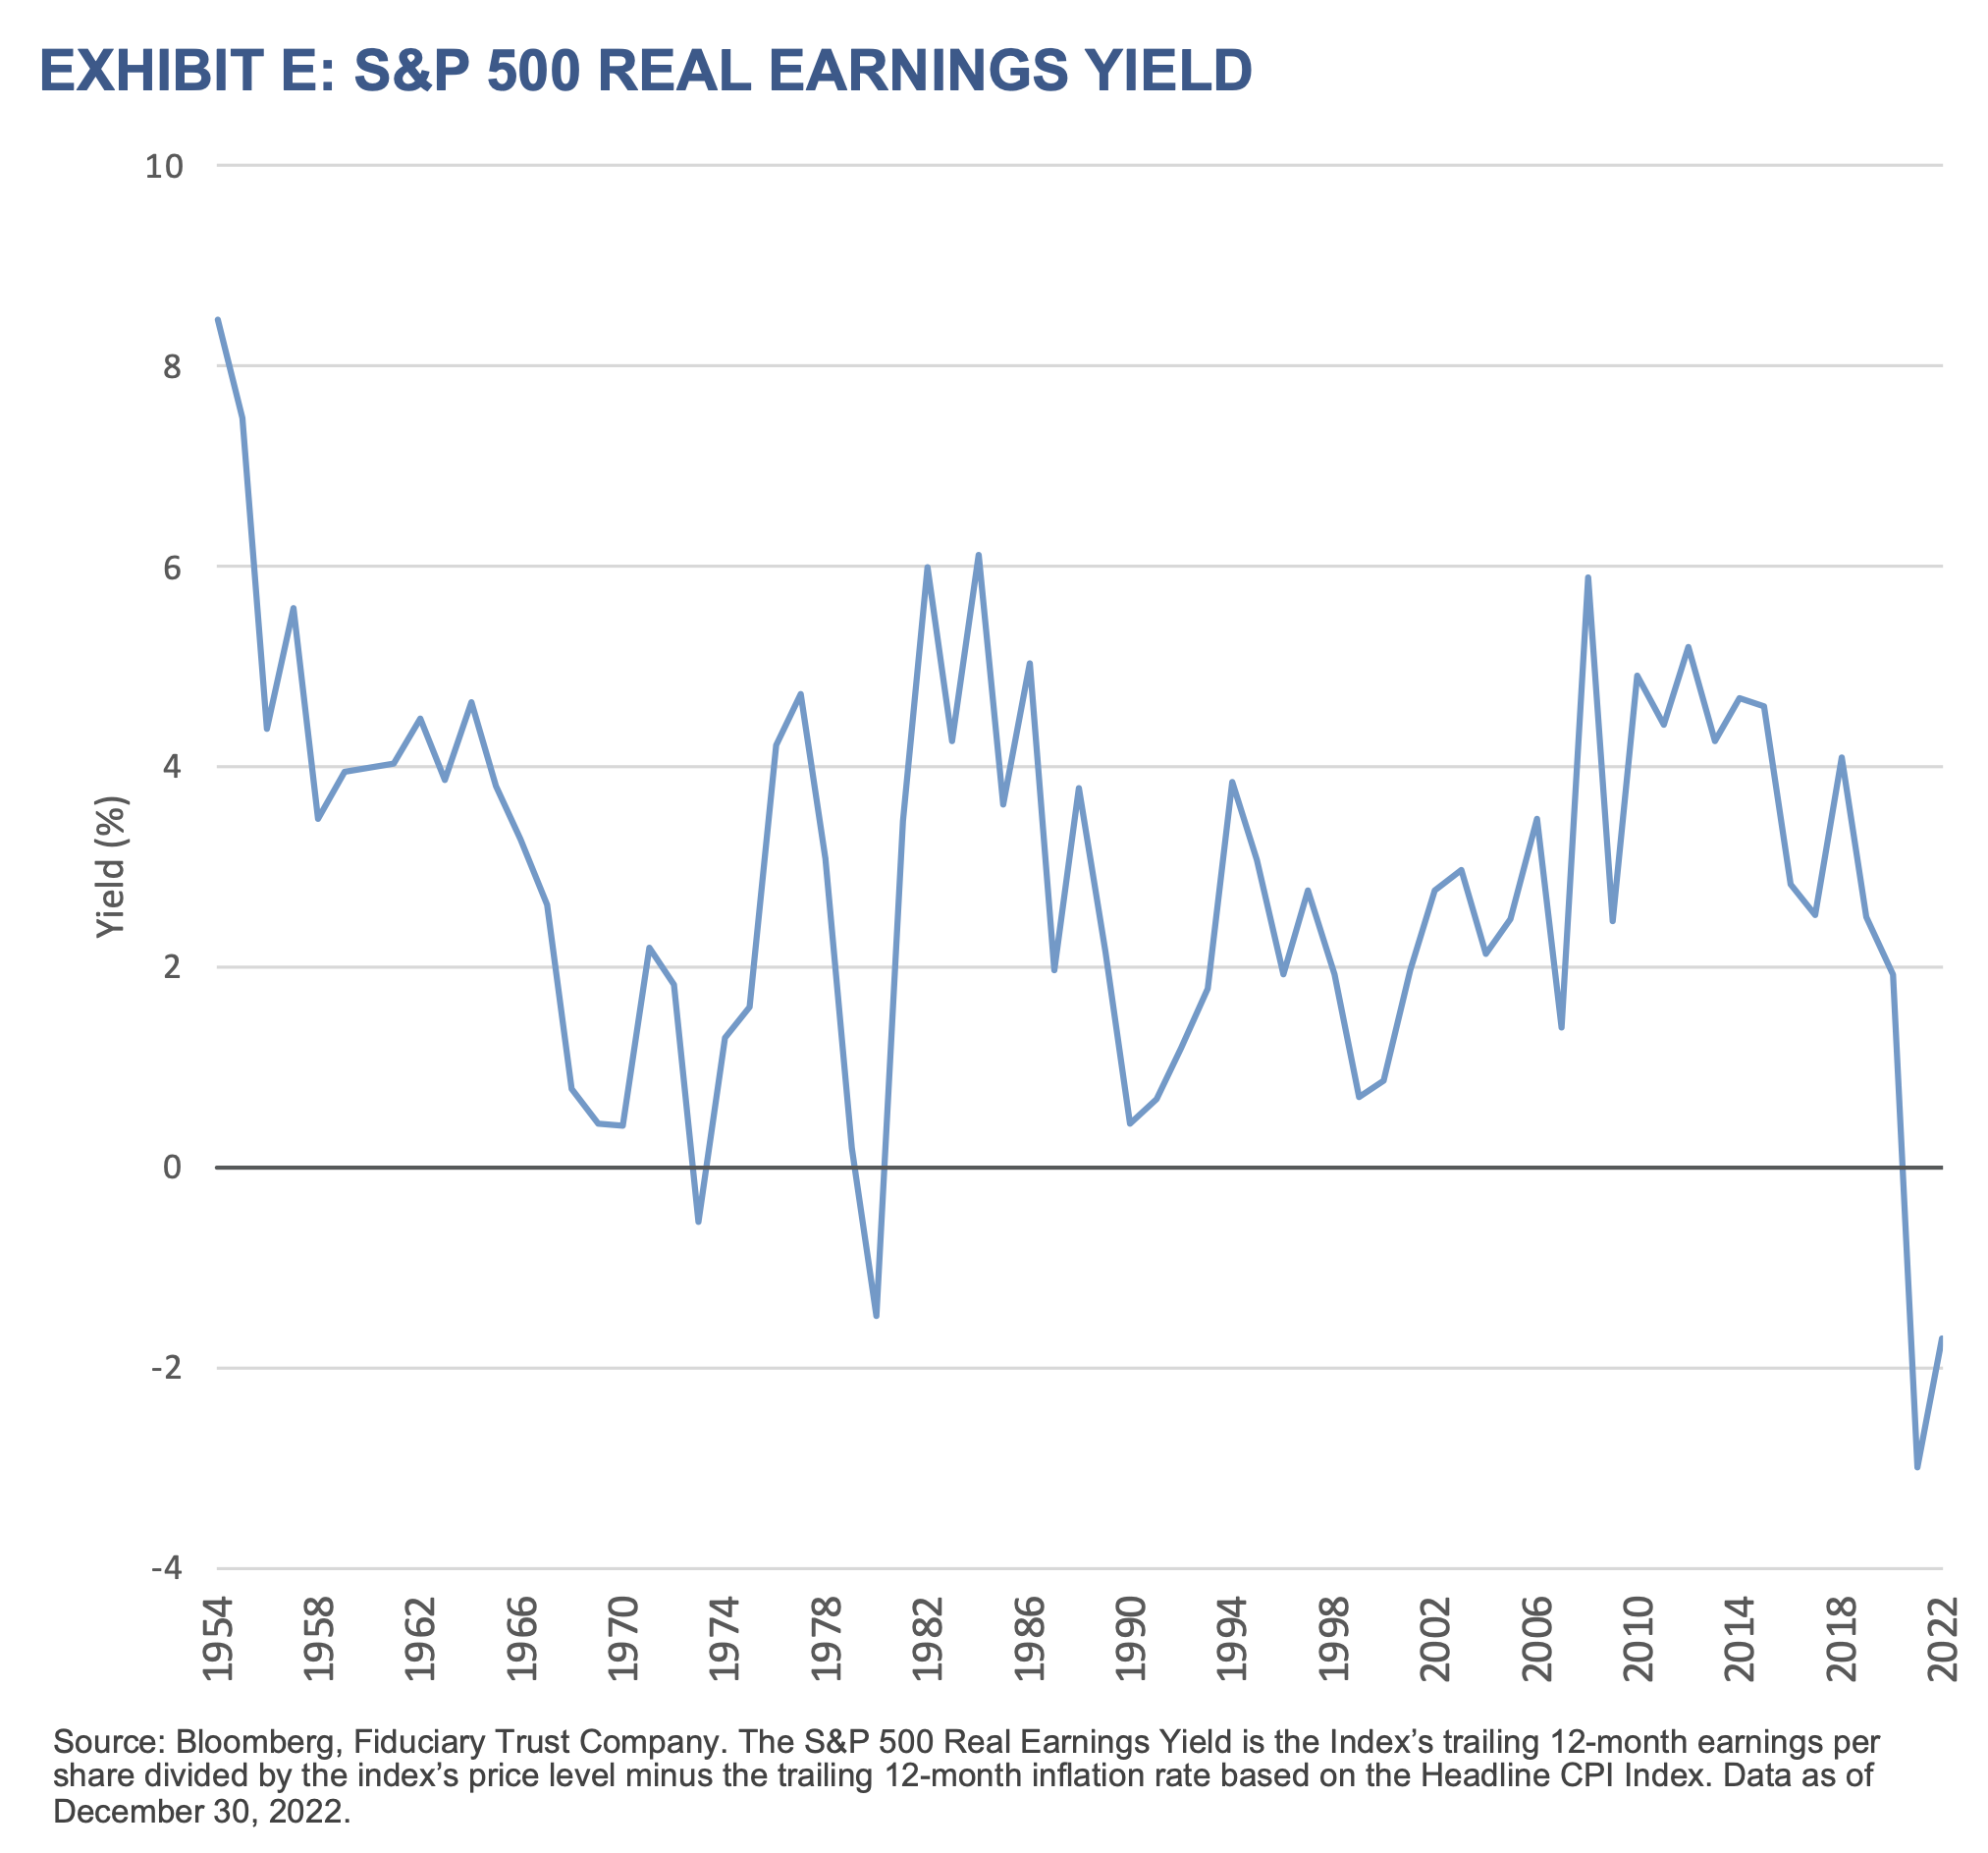 2023 Q1 Outlook - Exhibit E - S&P 500 Real Earnings Yield